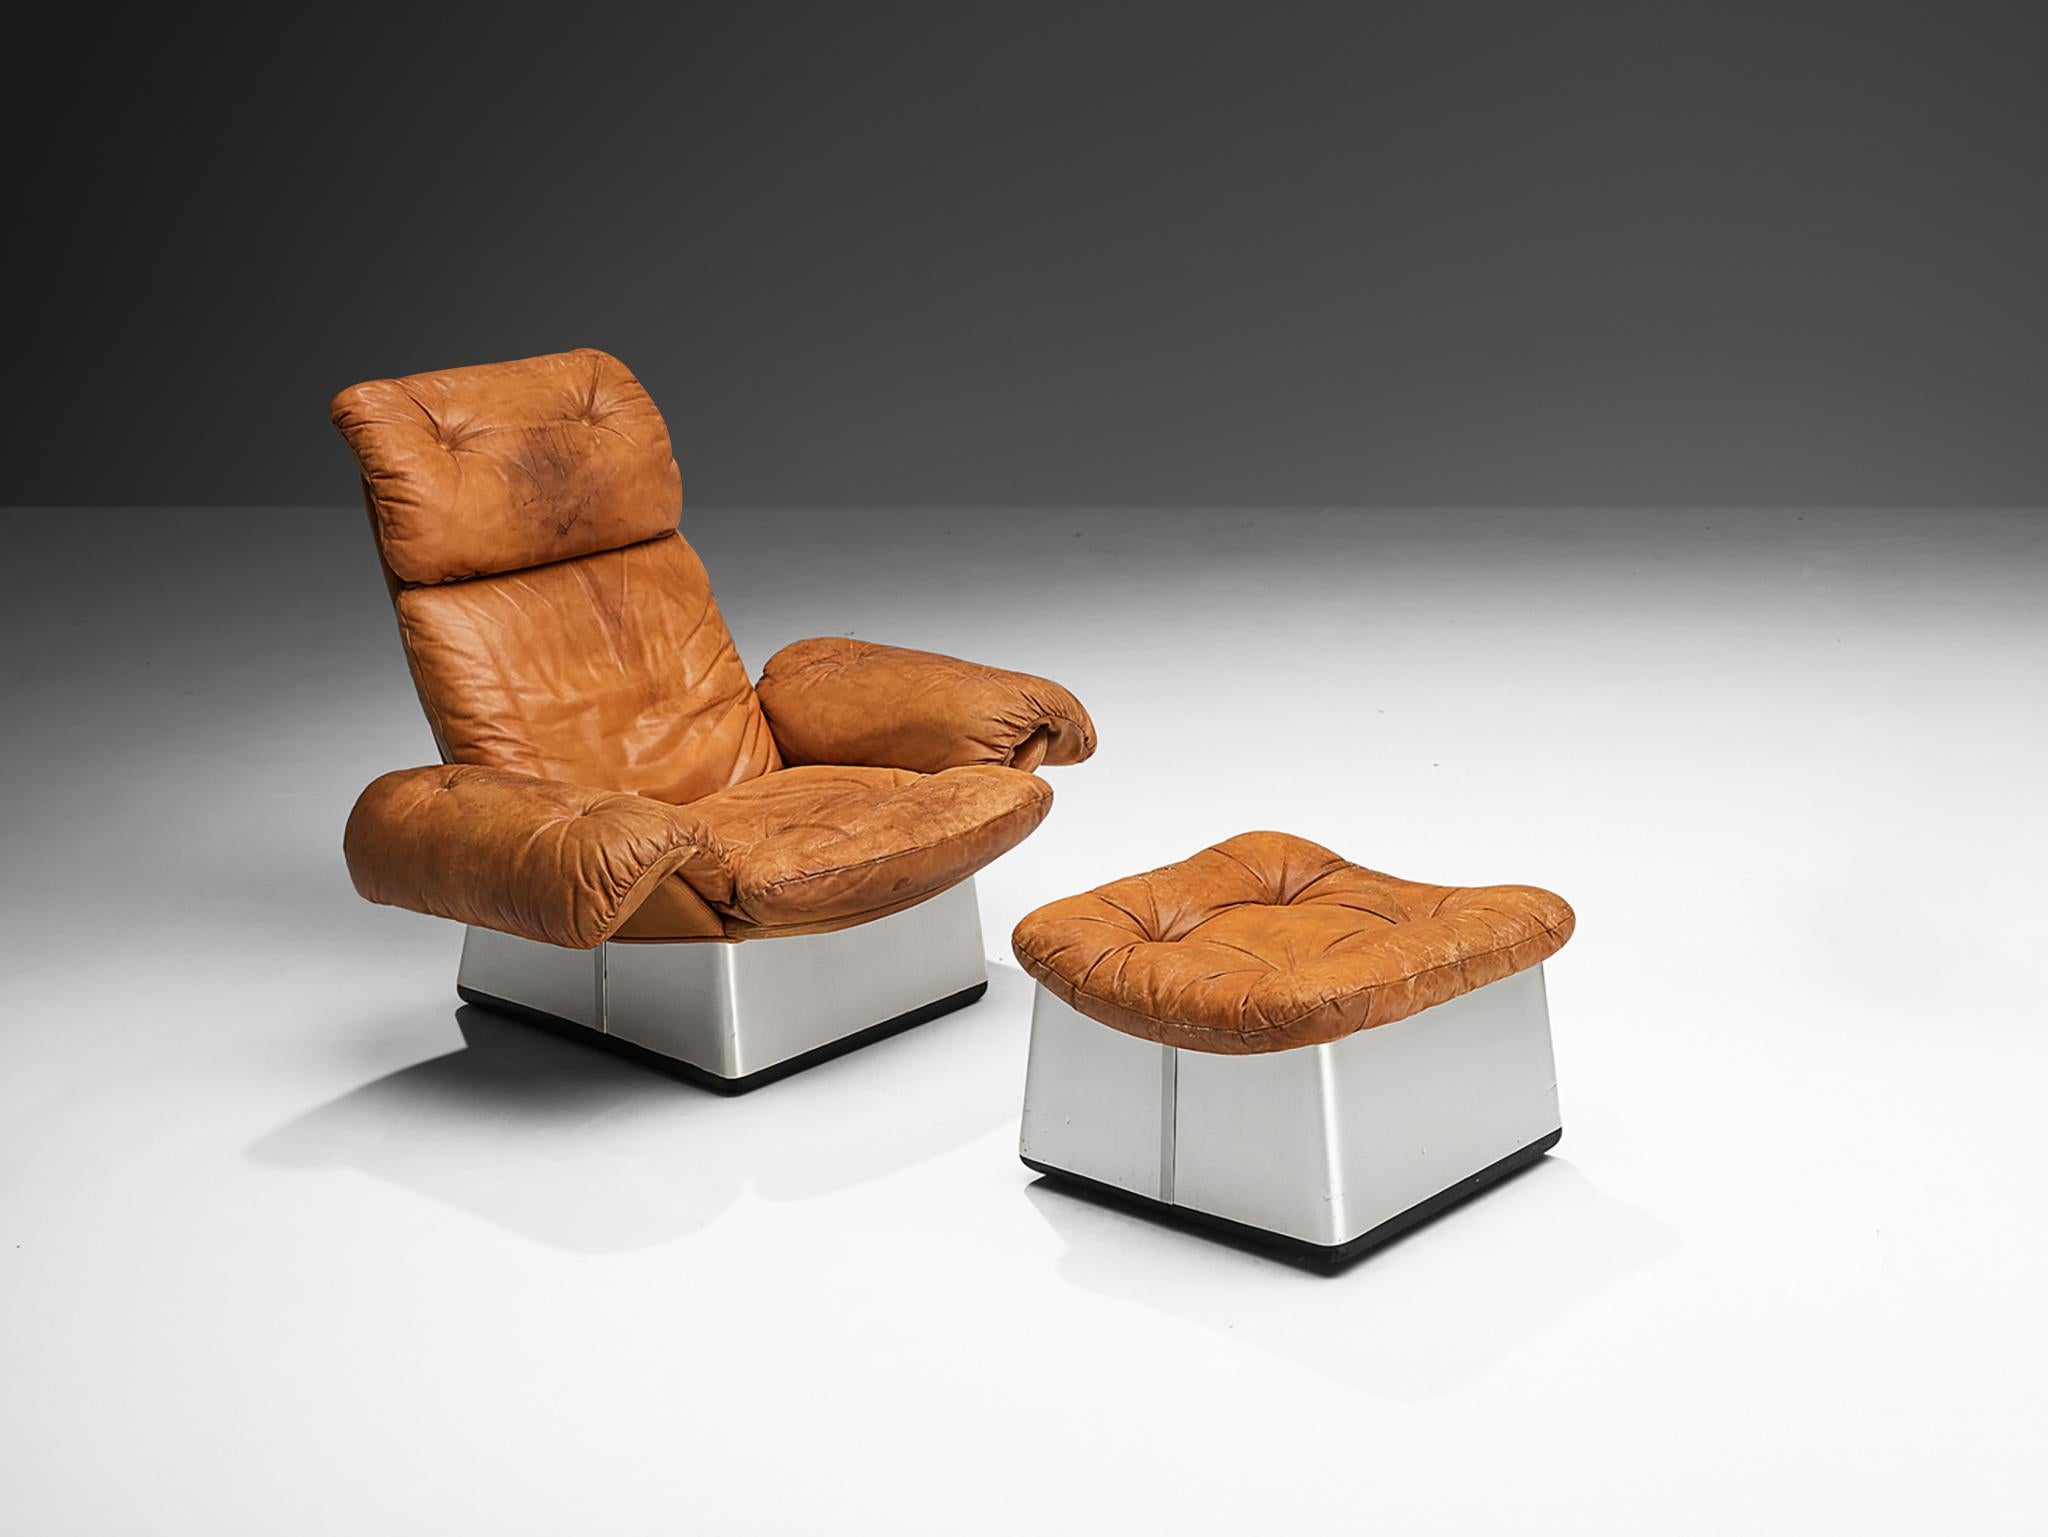 Lounge chair with ottoman, leather, aluminum, Italy 1970s

A set consisting of a lounge chair and ottoman made in Italy in the 1970s. This chair strongly represents the essence of furniture design of the 1970s, going beyond the strict conventions of